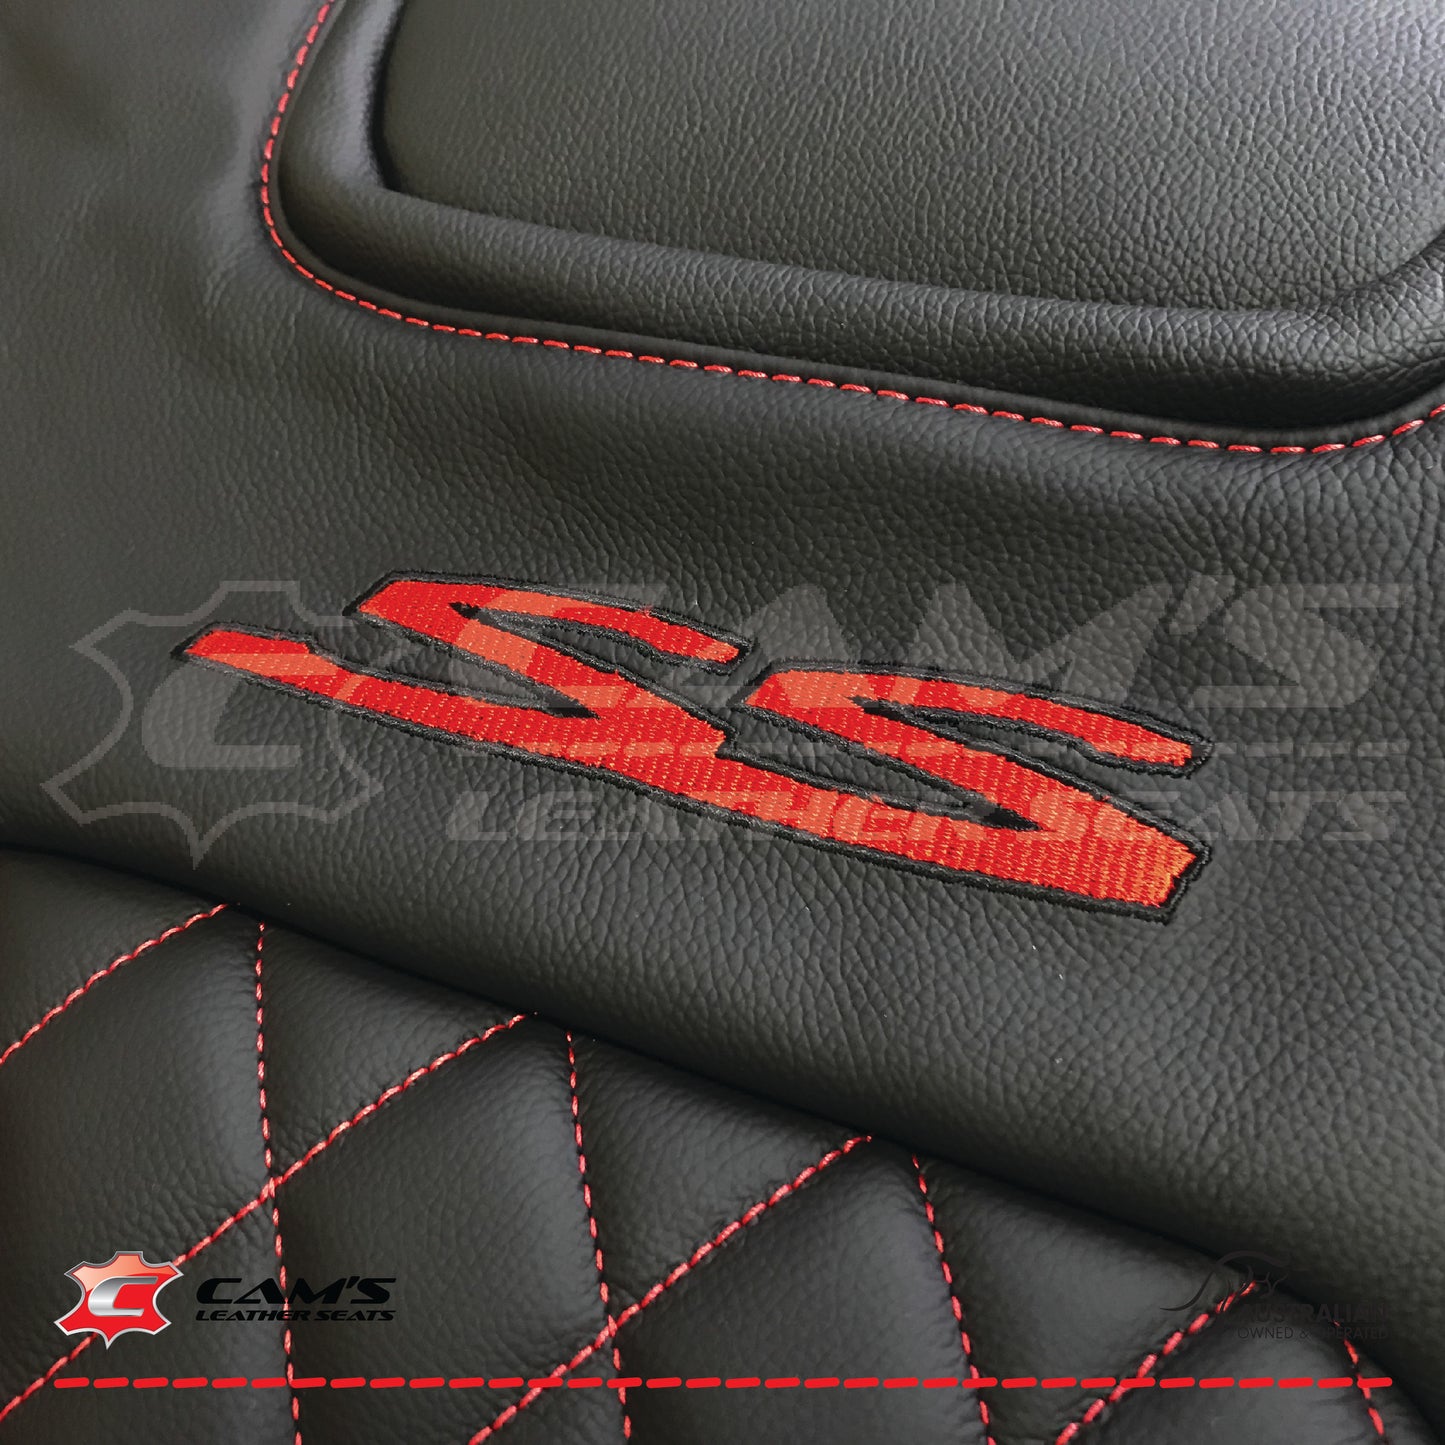 LEATHER SEATS TRIM KIT FOR HOLDEN VE SS UTE ONYX RED DIAMOND STITCH INSERTS